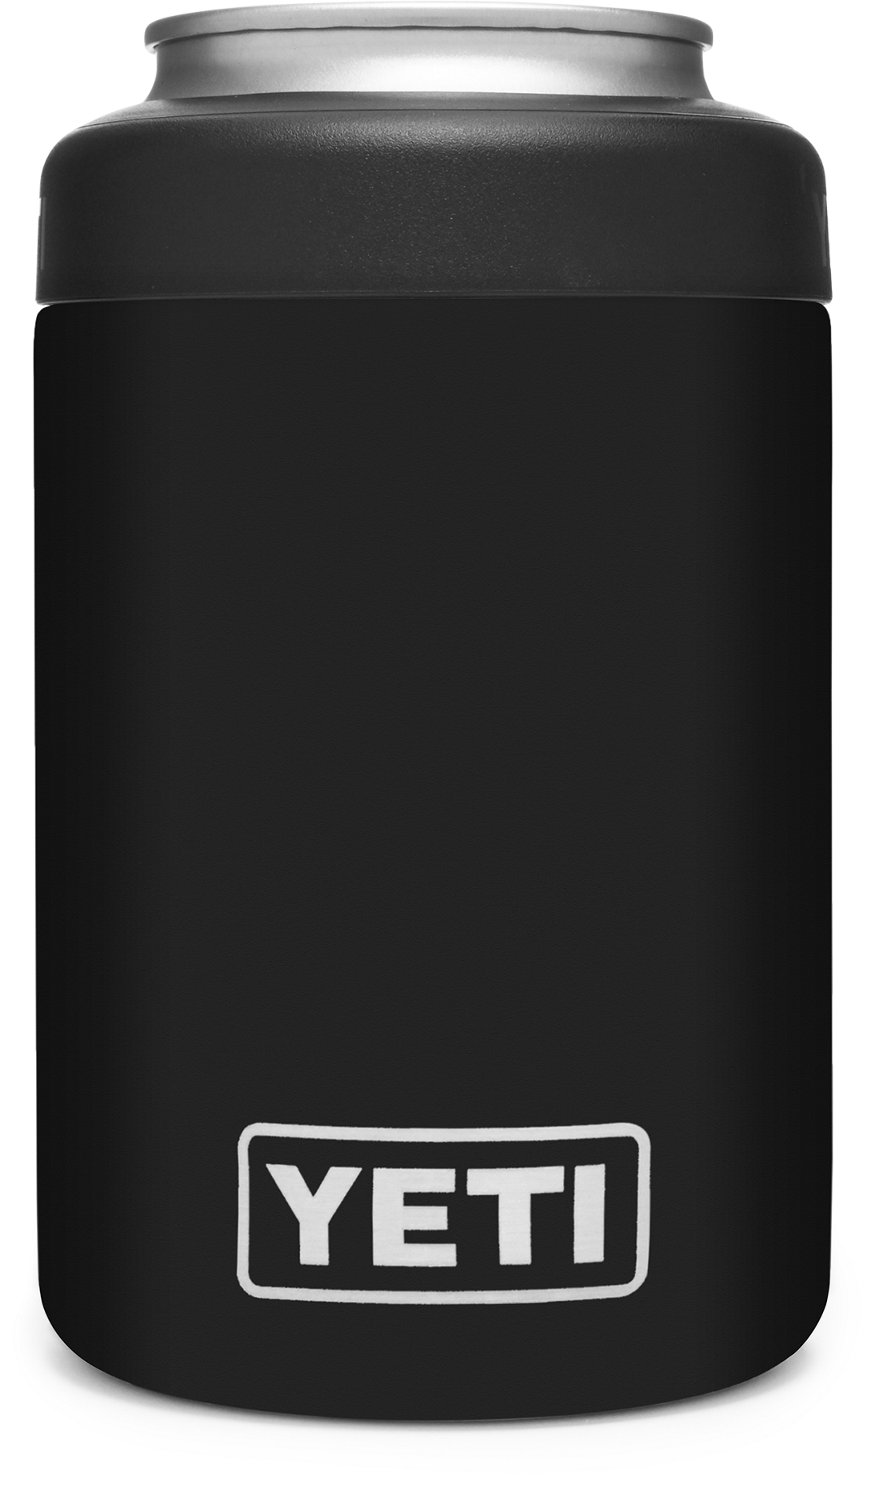 https://academy.scene7.com/is/image/academy//drinkware/yeti-rambler-colster-20-drink-holder-21071501577-black/4a5d04562cdb4a329d8fa29100462eaf?$d-plp-product-image$